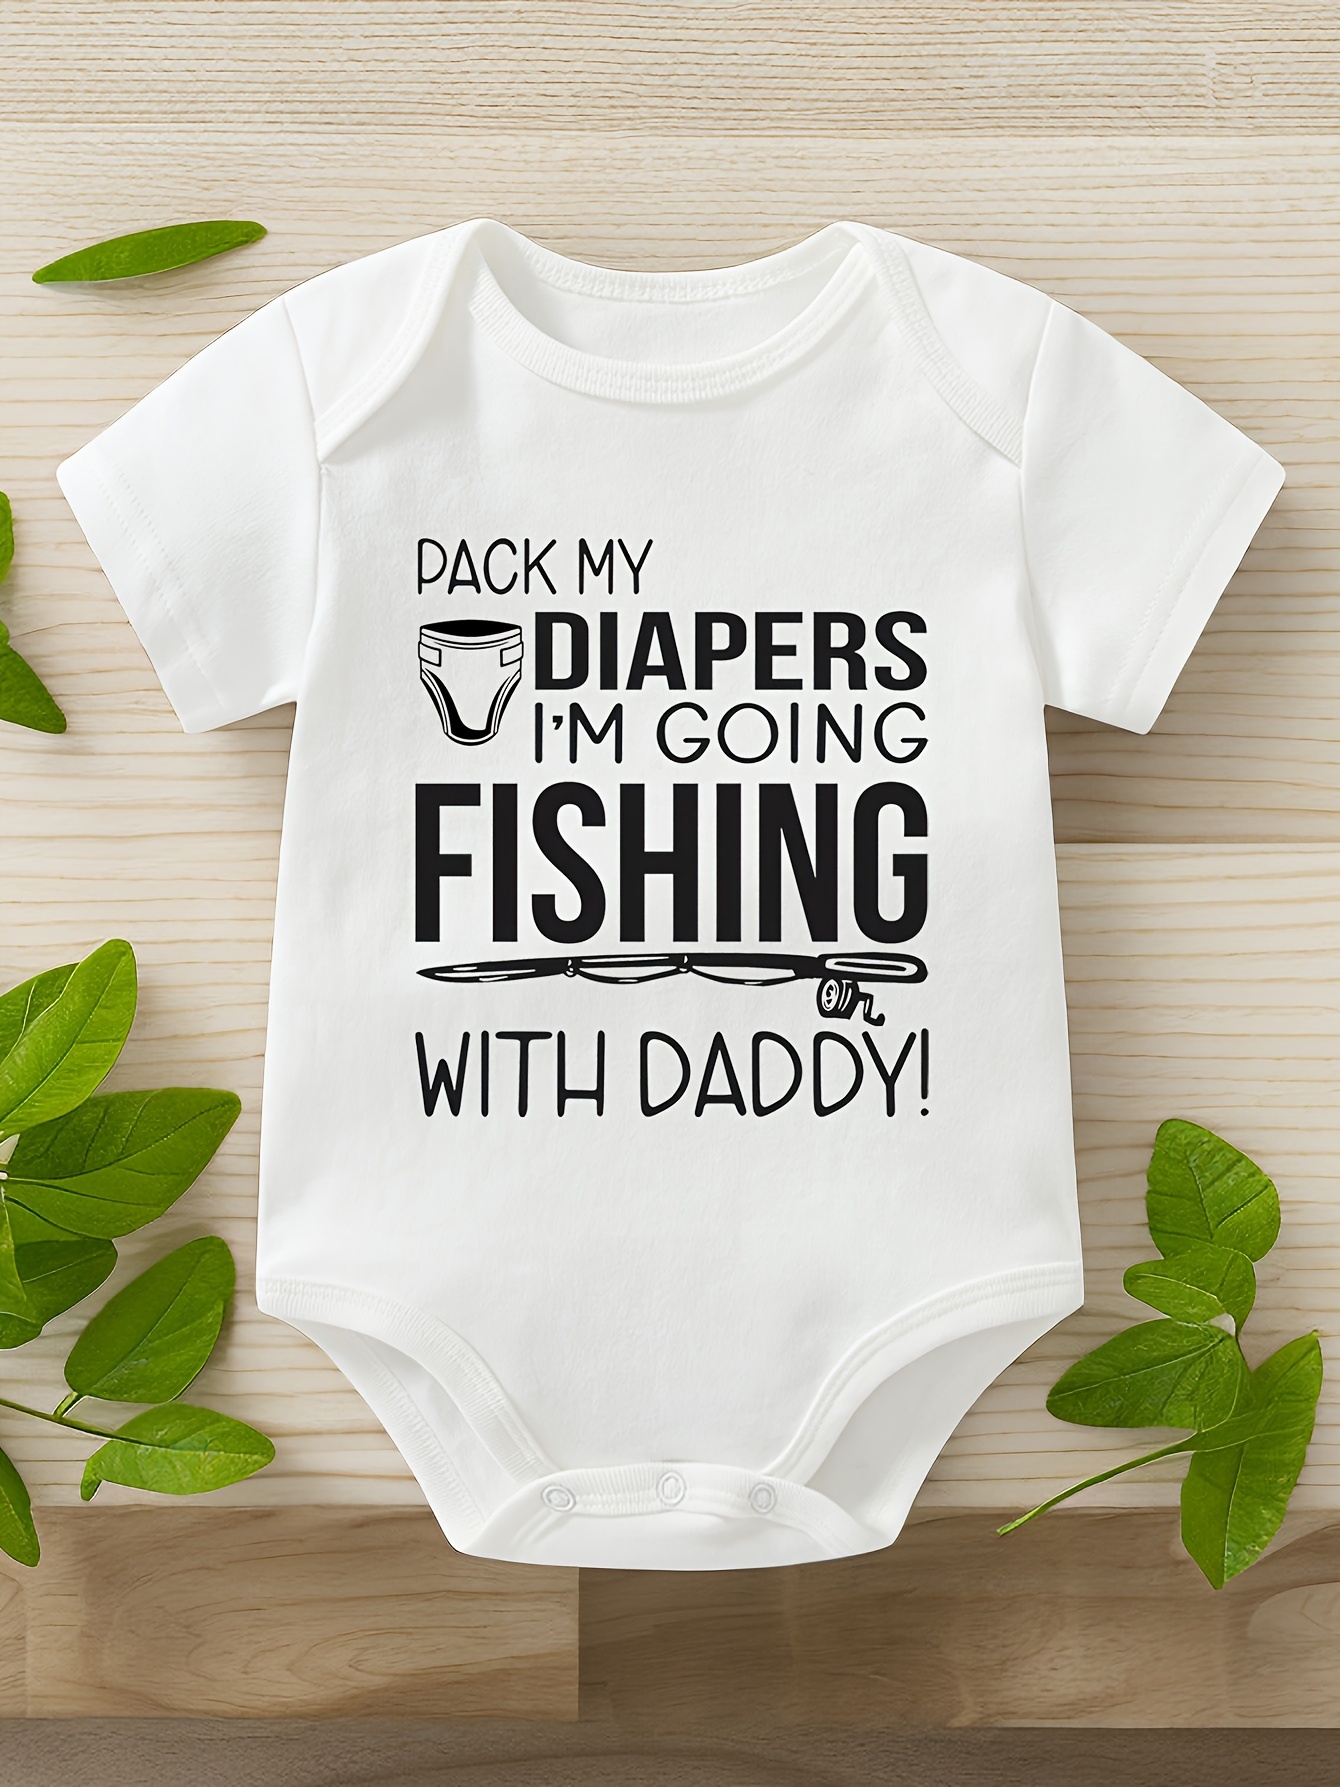 Pack My Diapers I'm Going Fishing with Grandpa Baby Onesie Cute Baby Outfit for Baby Gift 2T Shirt / Short Sleeve White